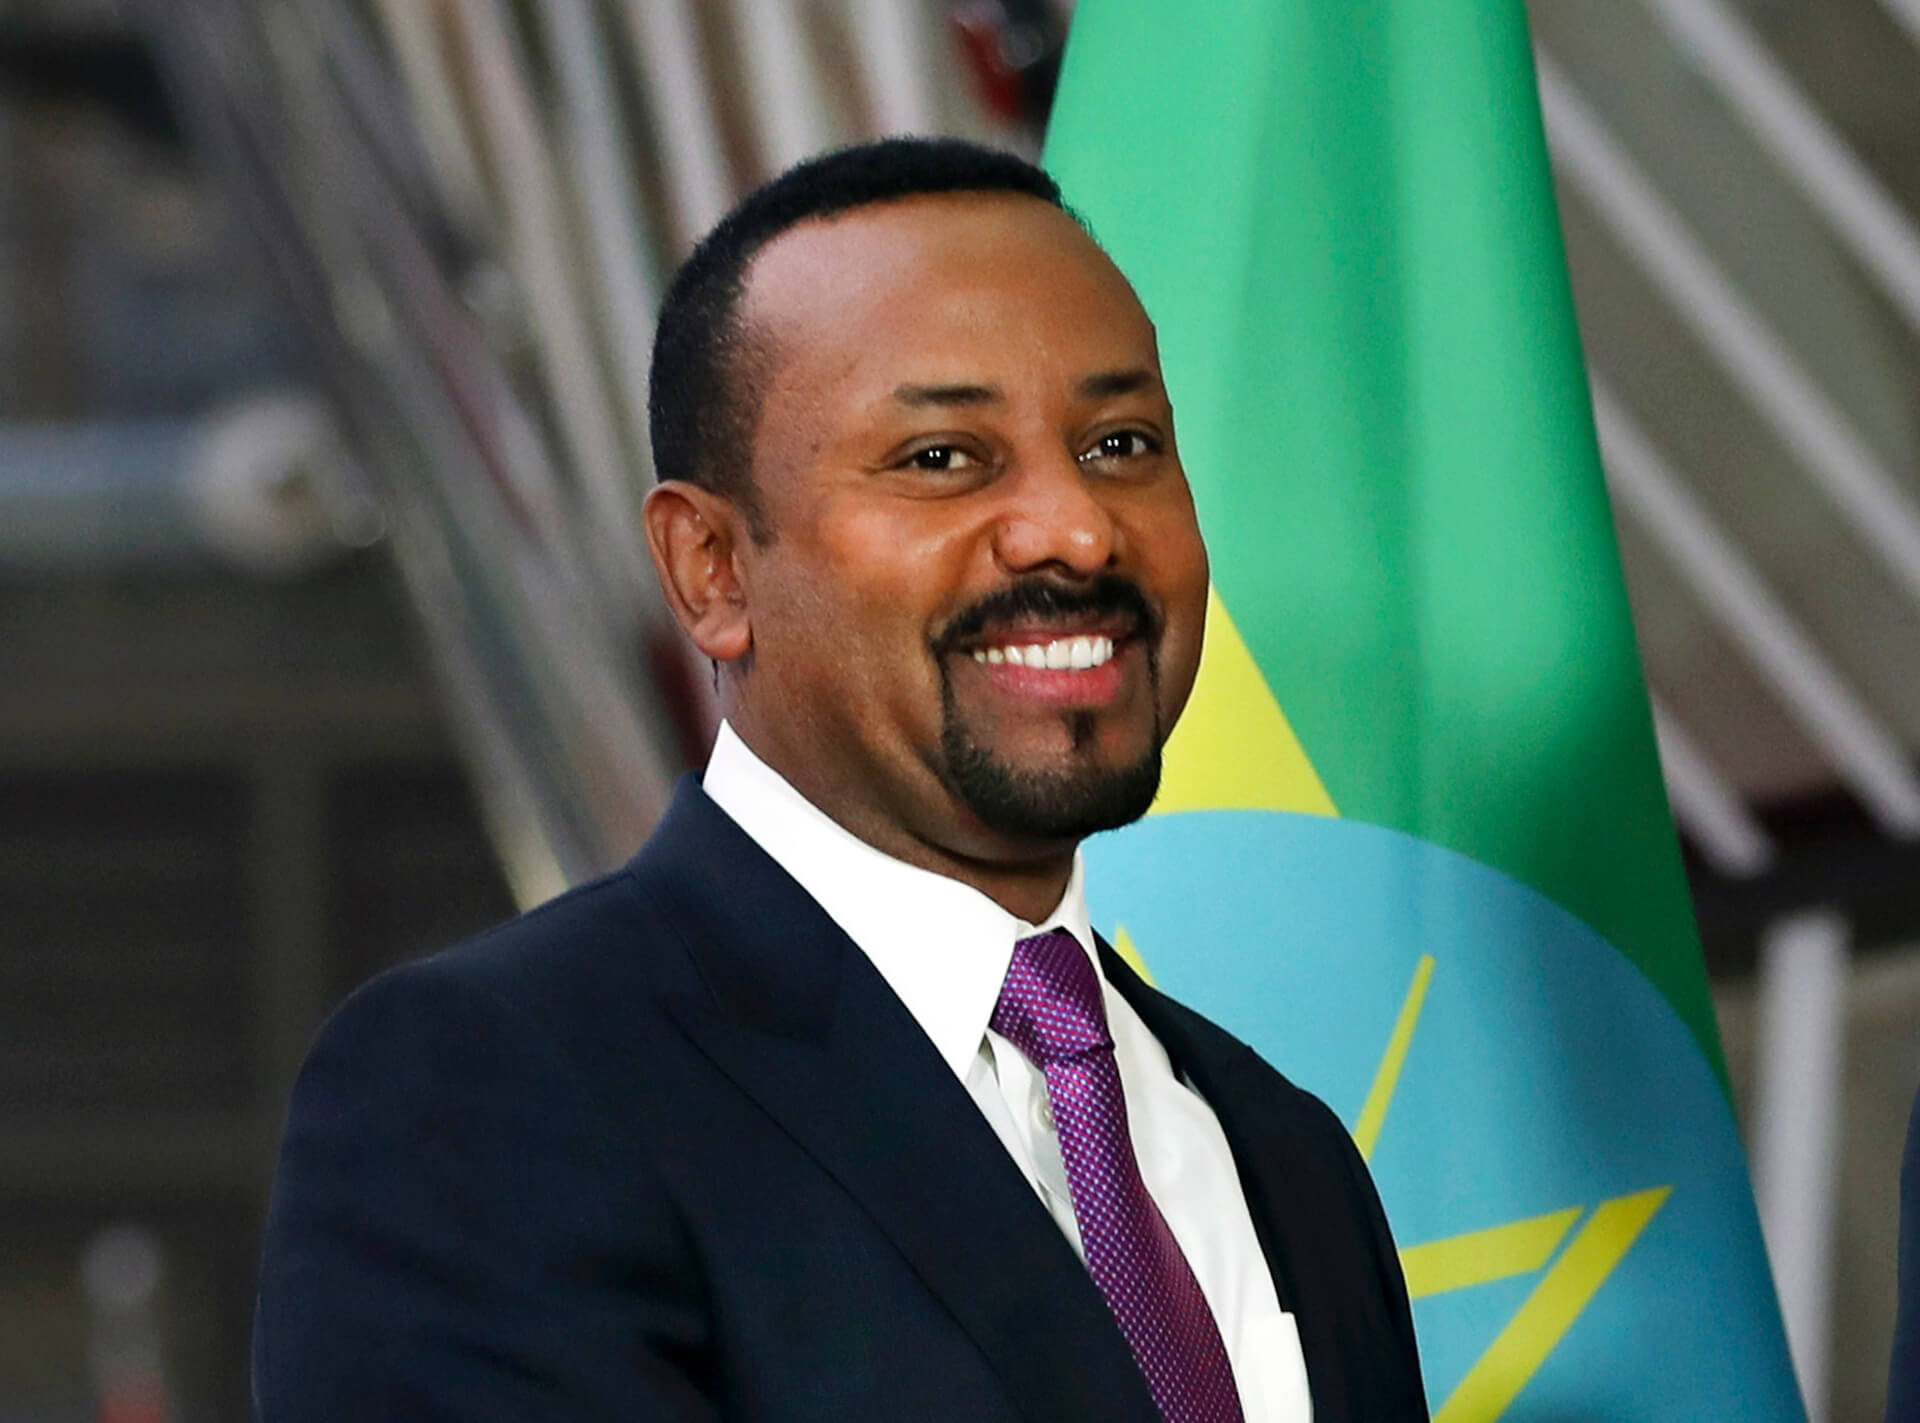 Ethiopian PM Abiy Declares “Victory” From Frontline as Forces Recapture TPLF-Held Towns